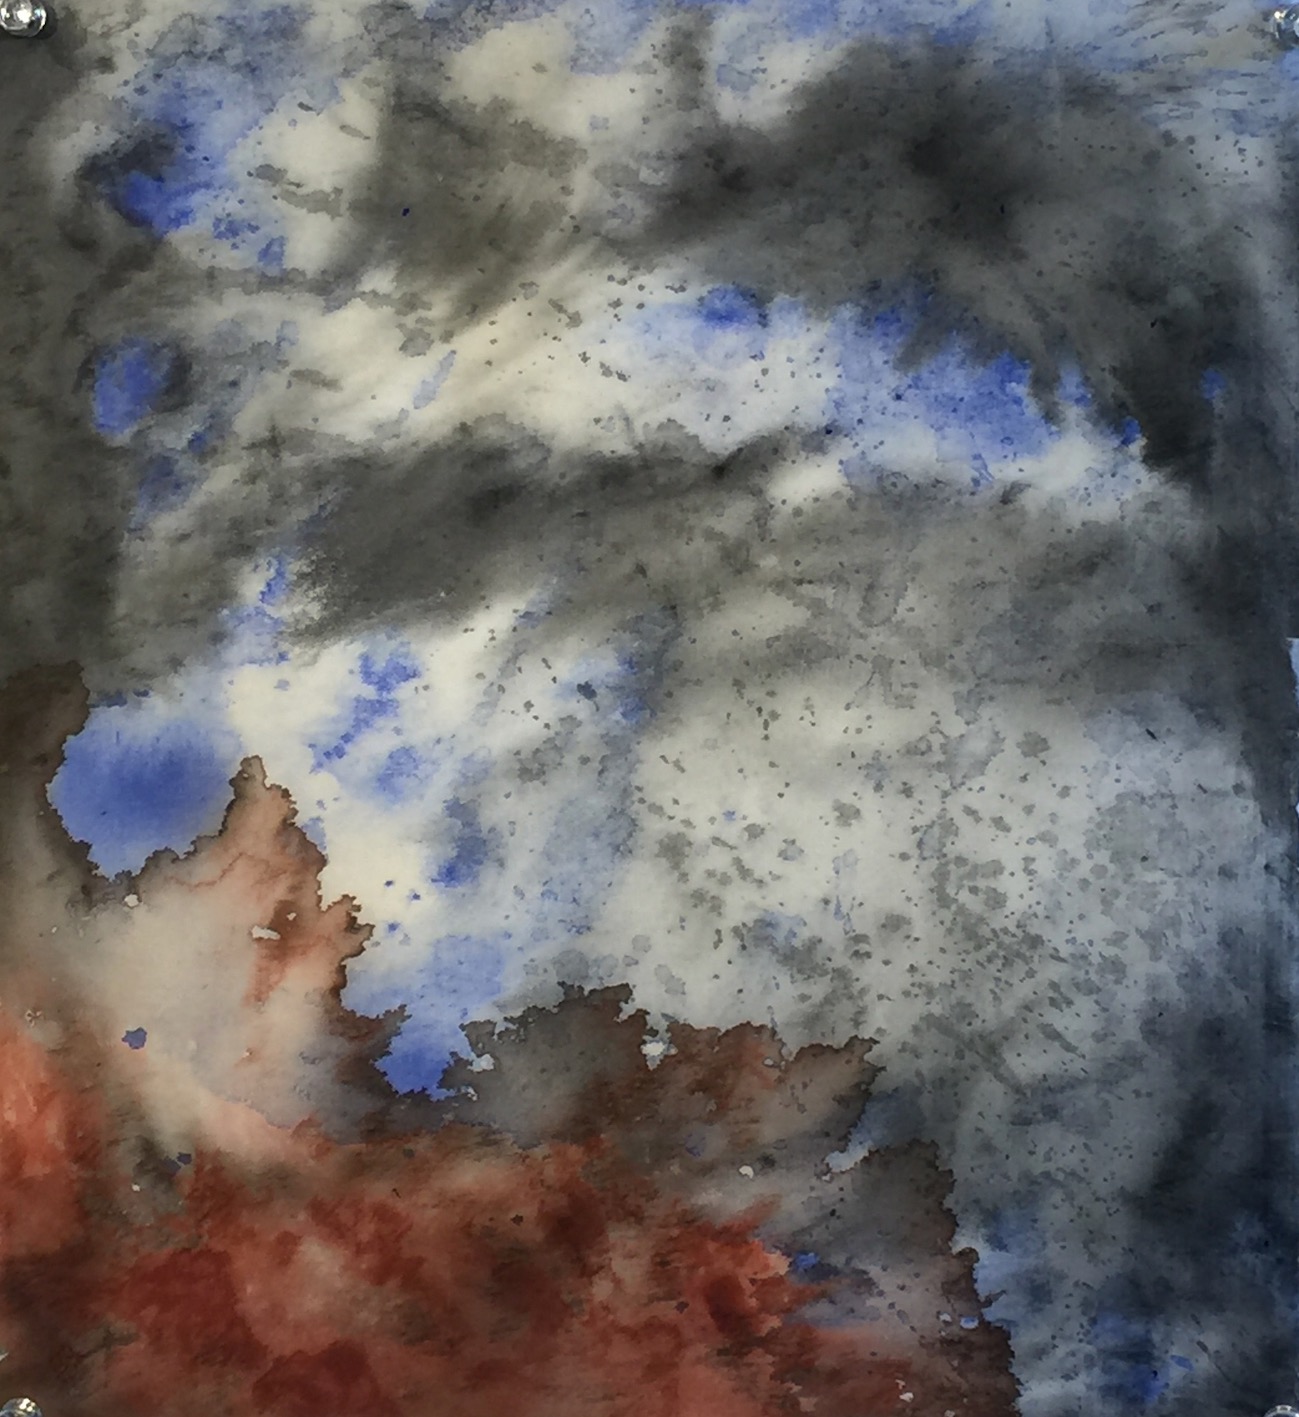 Red Rock in the Blue Air 5 36 X 33 cms Sumi ink, acrylic, iron oxide 惑星の誕生 5 墨　アクリル、 ベンガラ 2020